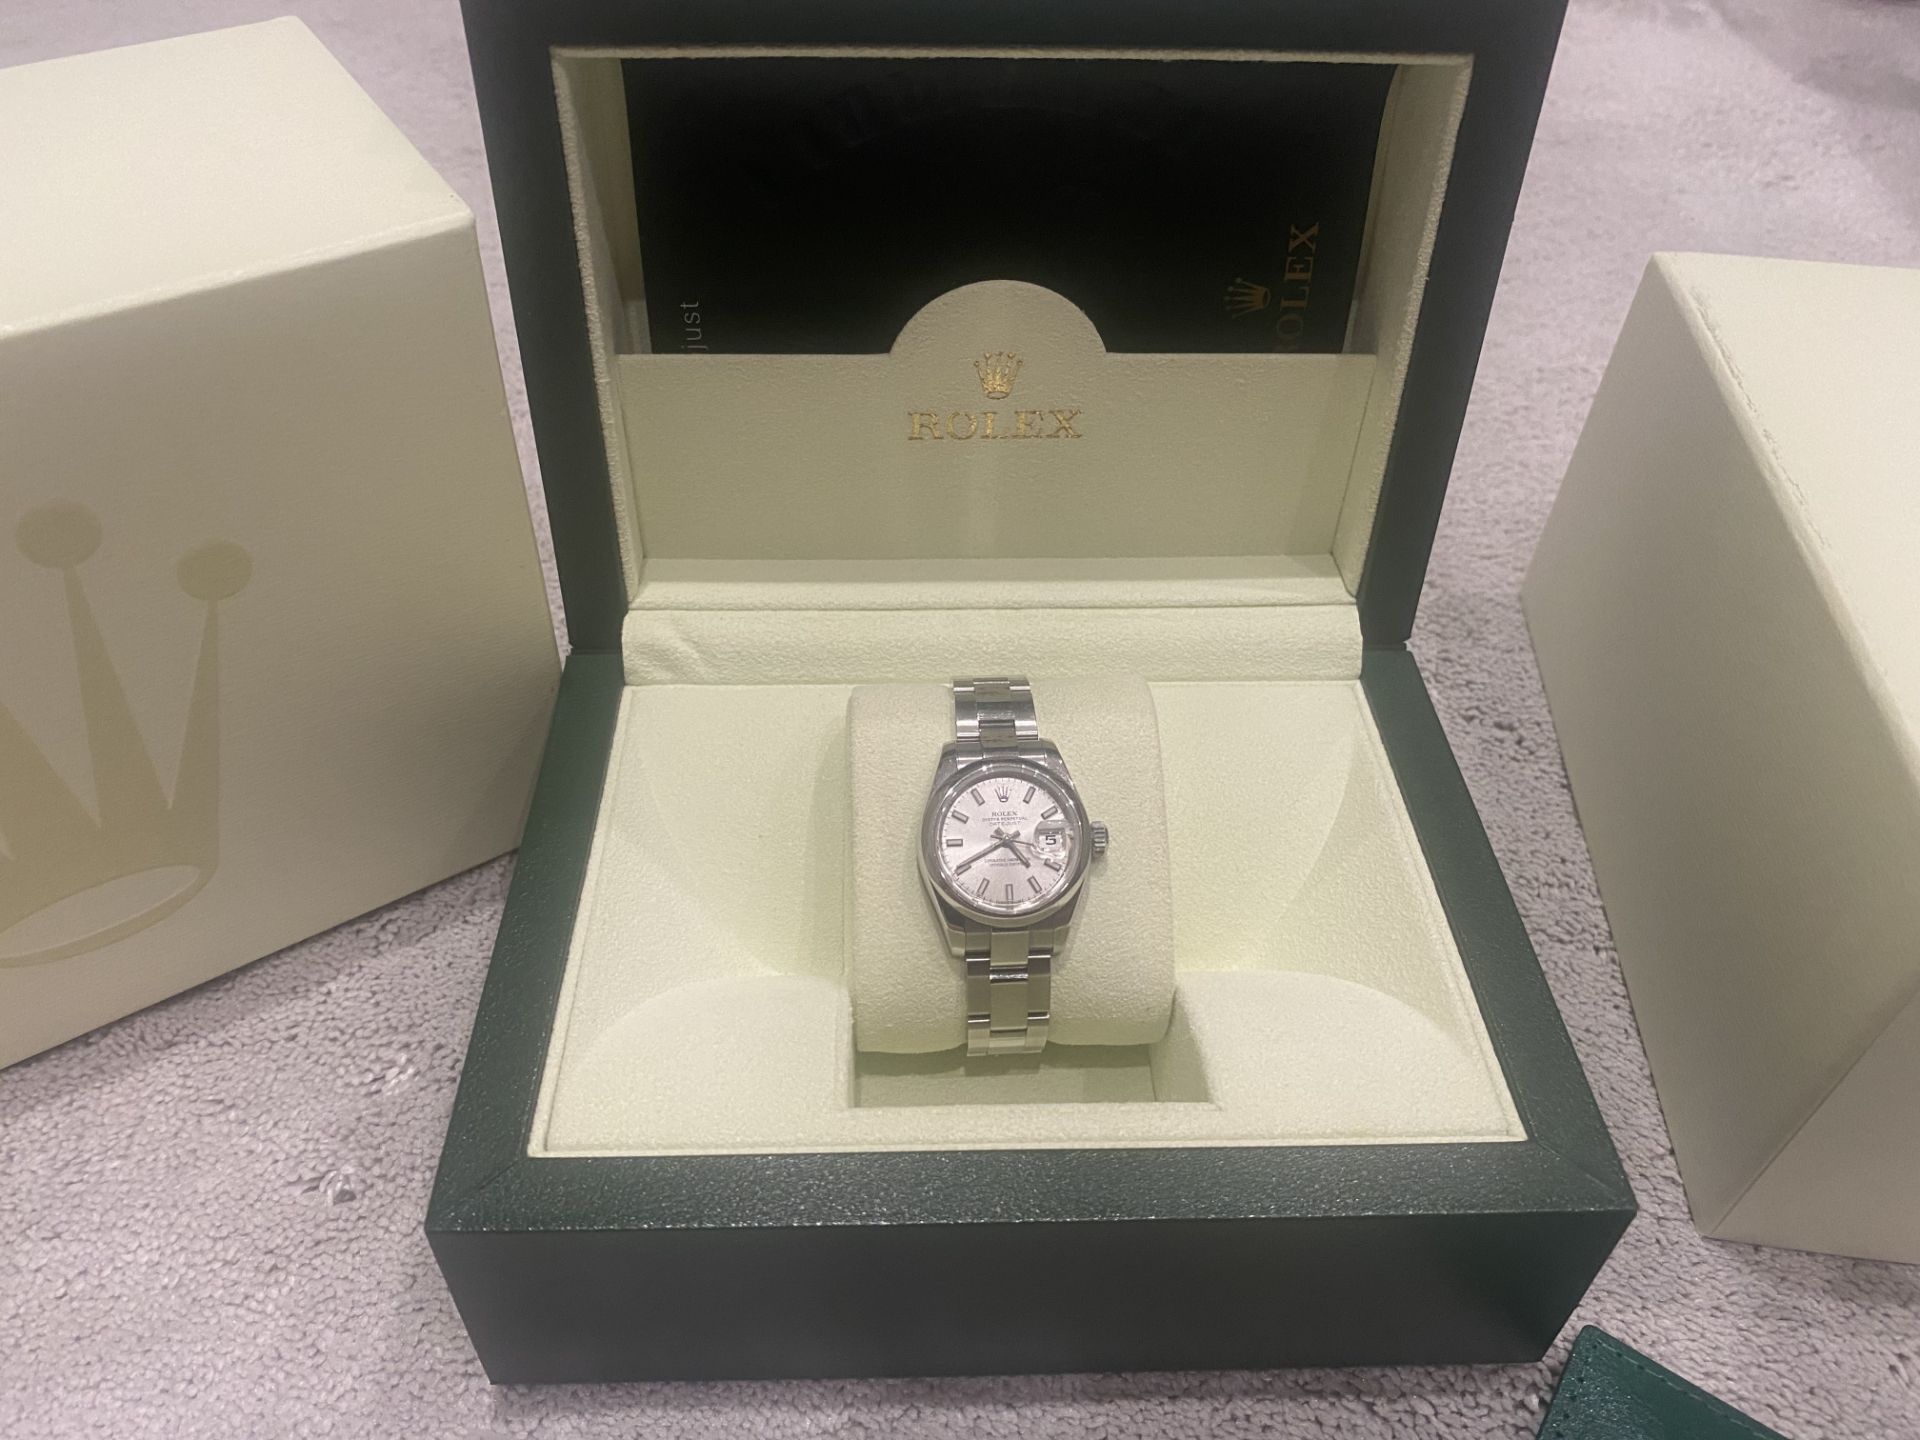 (ON SALE) ROLEX OYSTER PERPETUAL "DATEJUST" NOVEMBER 2017 *SILVER DIAL* WITH BOX AND WARRANTY CARD - Image 6 of 10